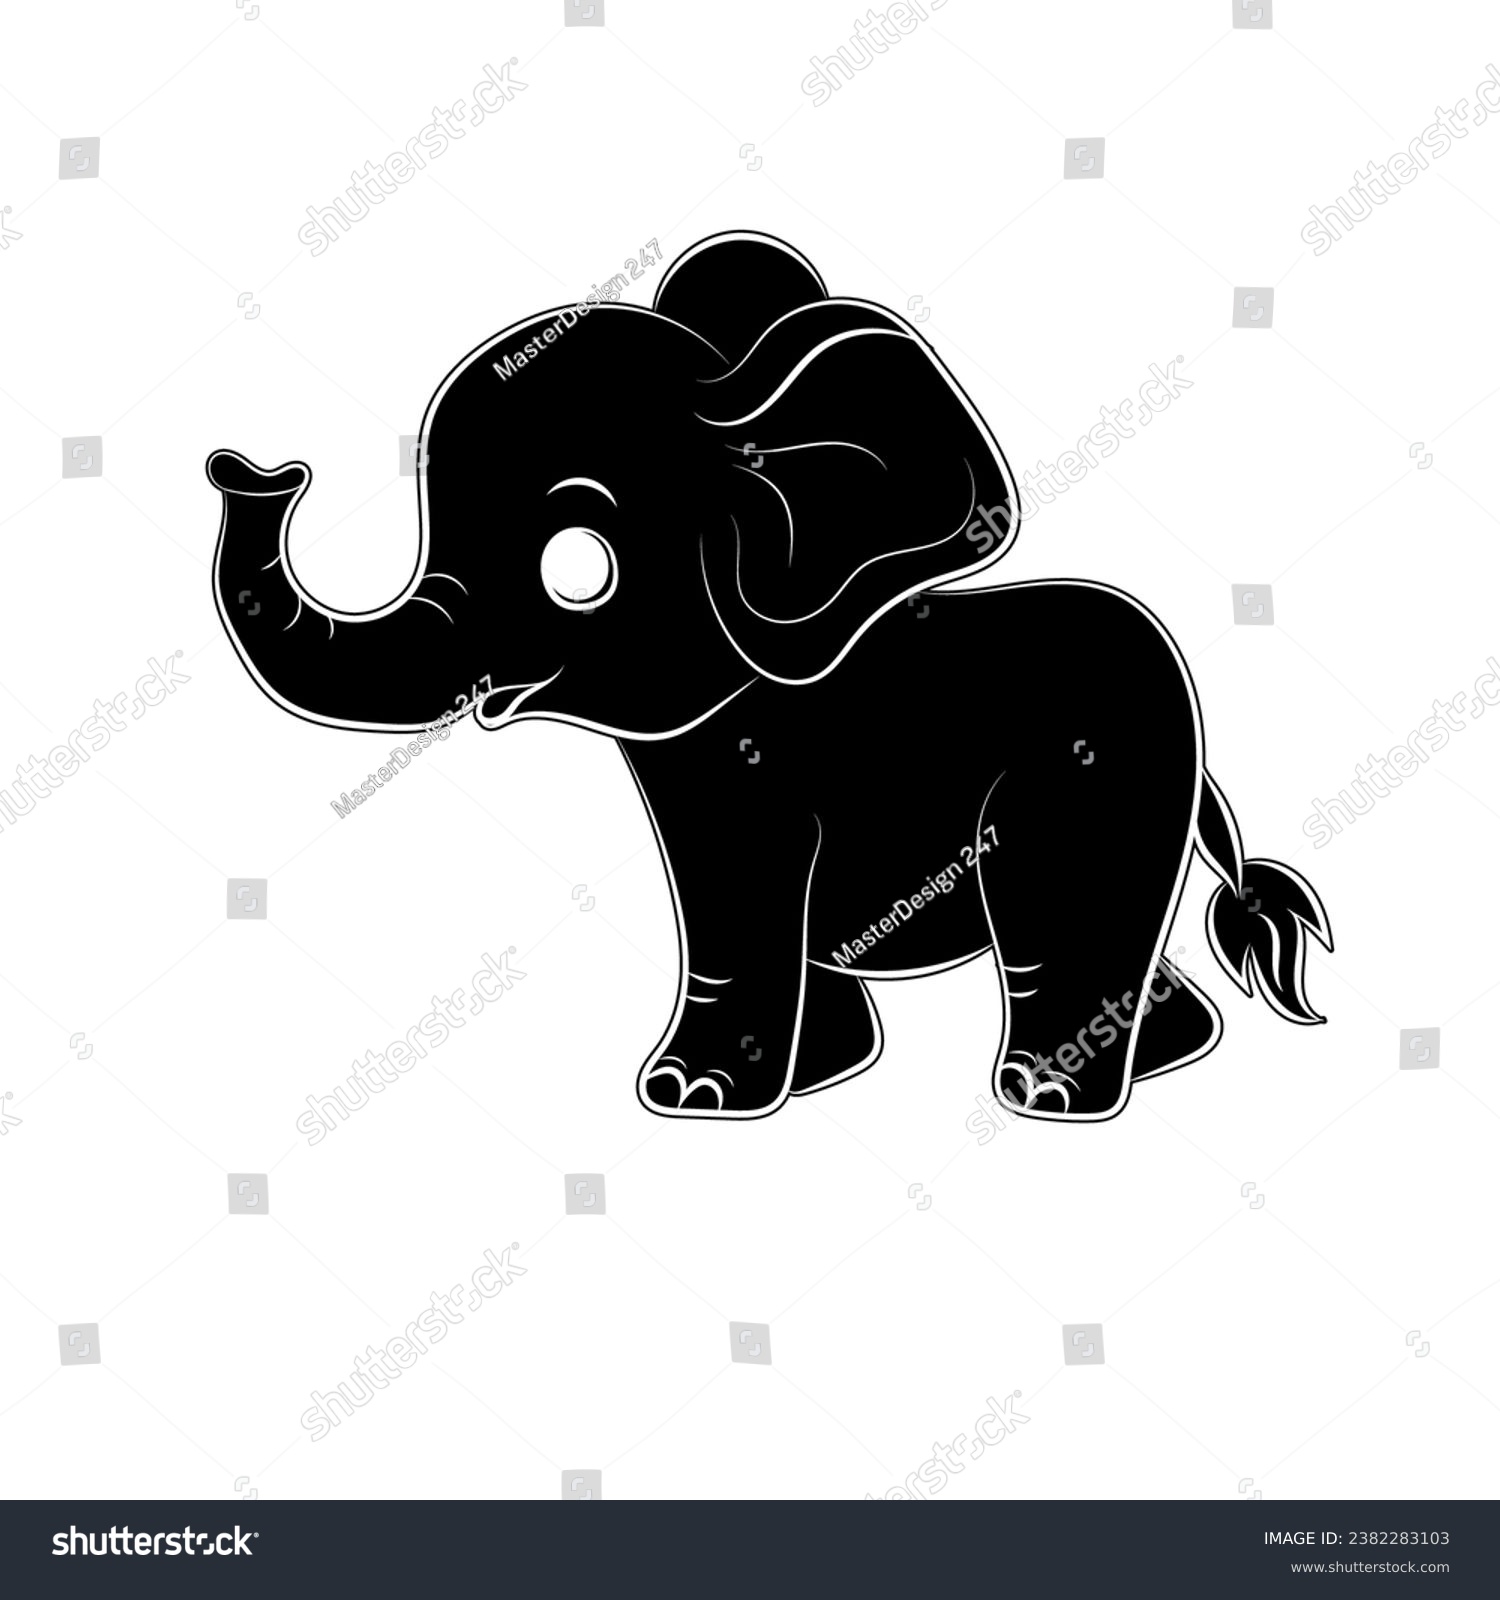 SVG of Elephant coloring page for kids Hand drawn elephant outline illustration, Set of elephant character silhouette
 svg